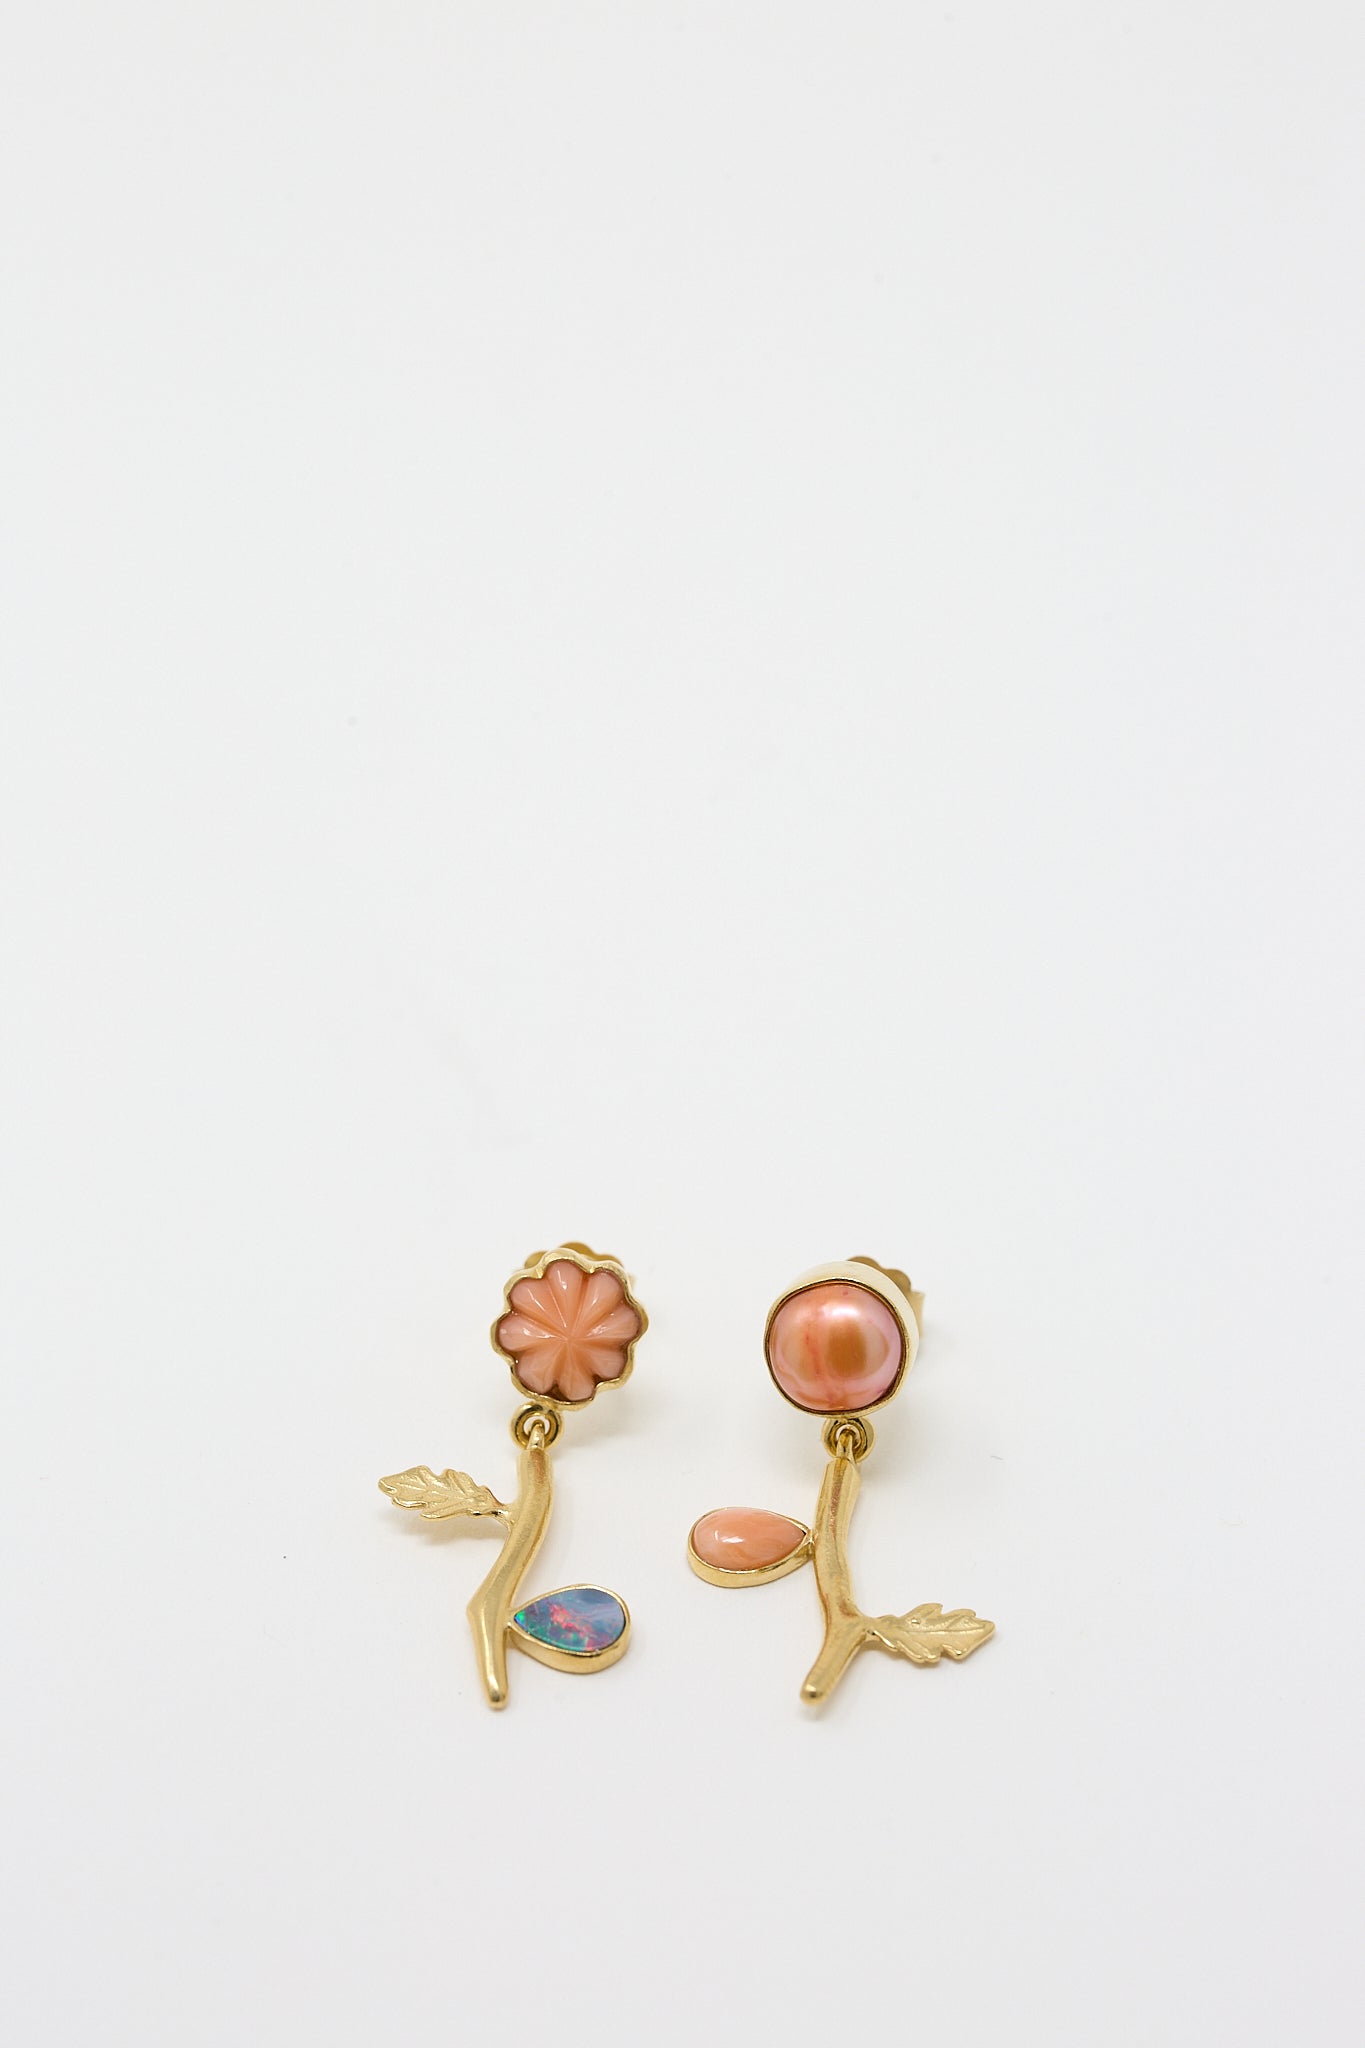 A pair of Grainne Morton Flower Drop Earrings with coral and opal stones.